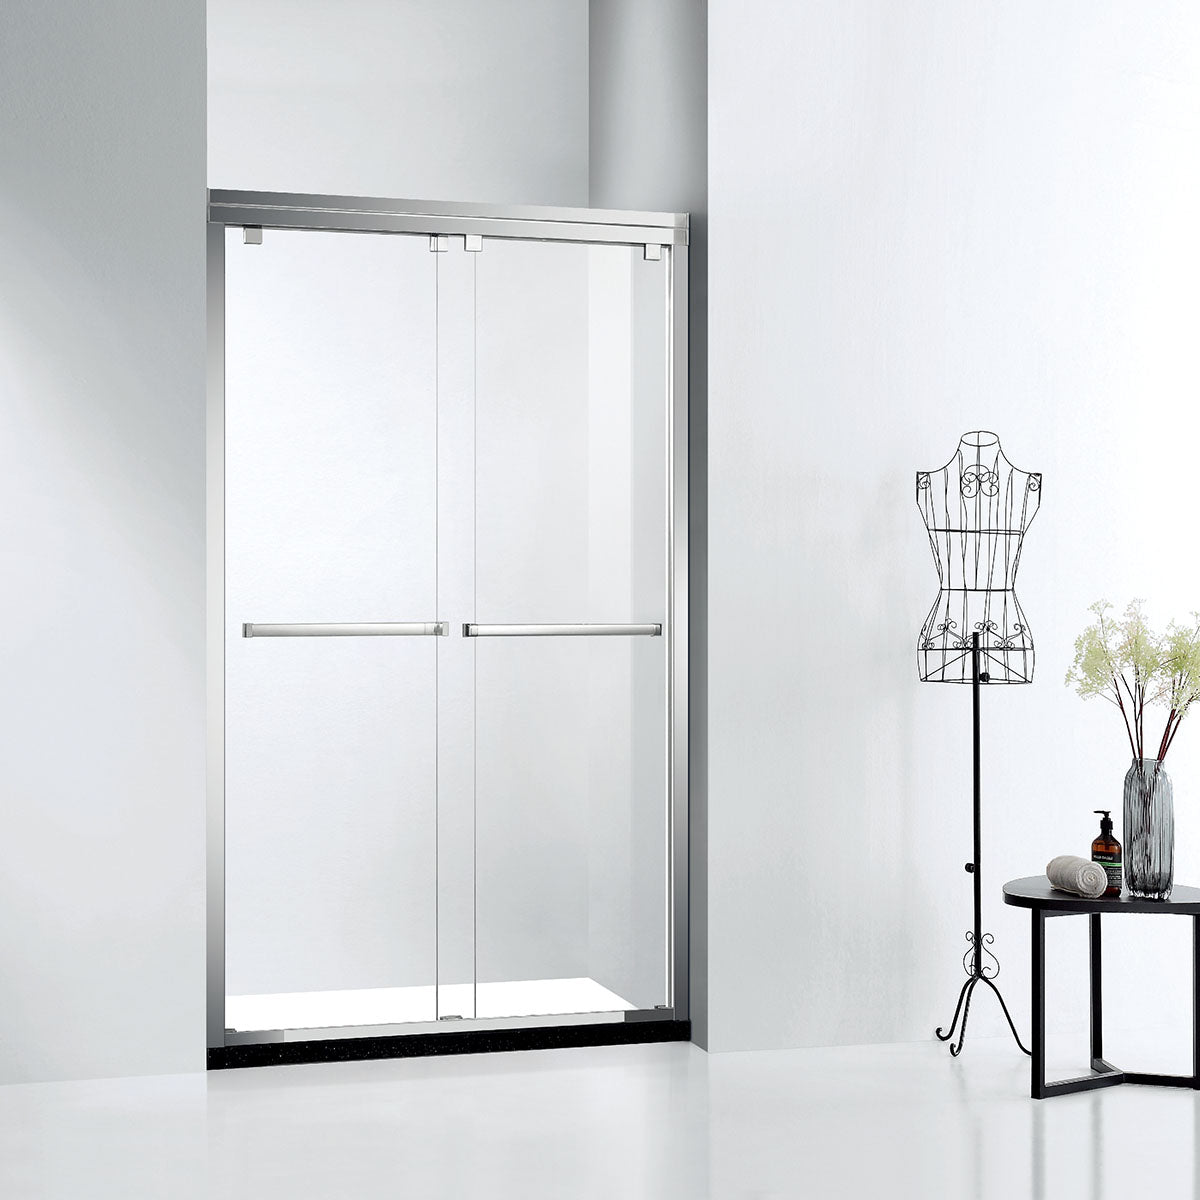 66" ASD Series Bypass66" Shower Door with Klearteck Treatment (5/16" Thickness) Low Ceiling 72" (Silver /Chrome)